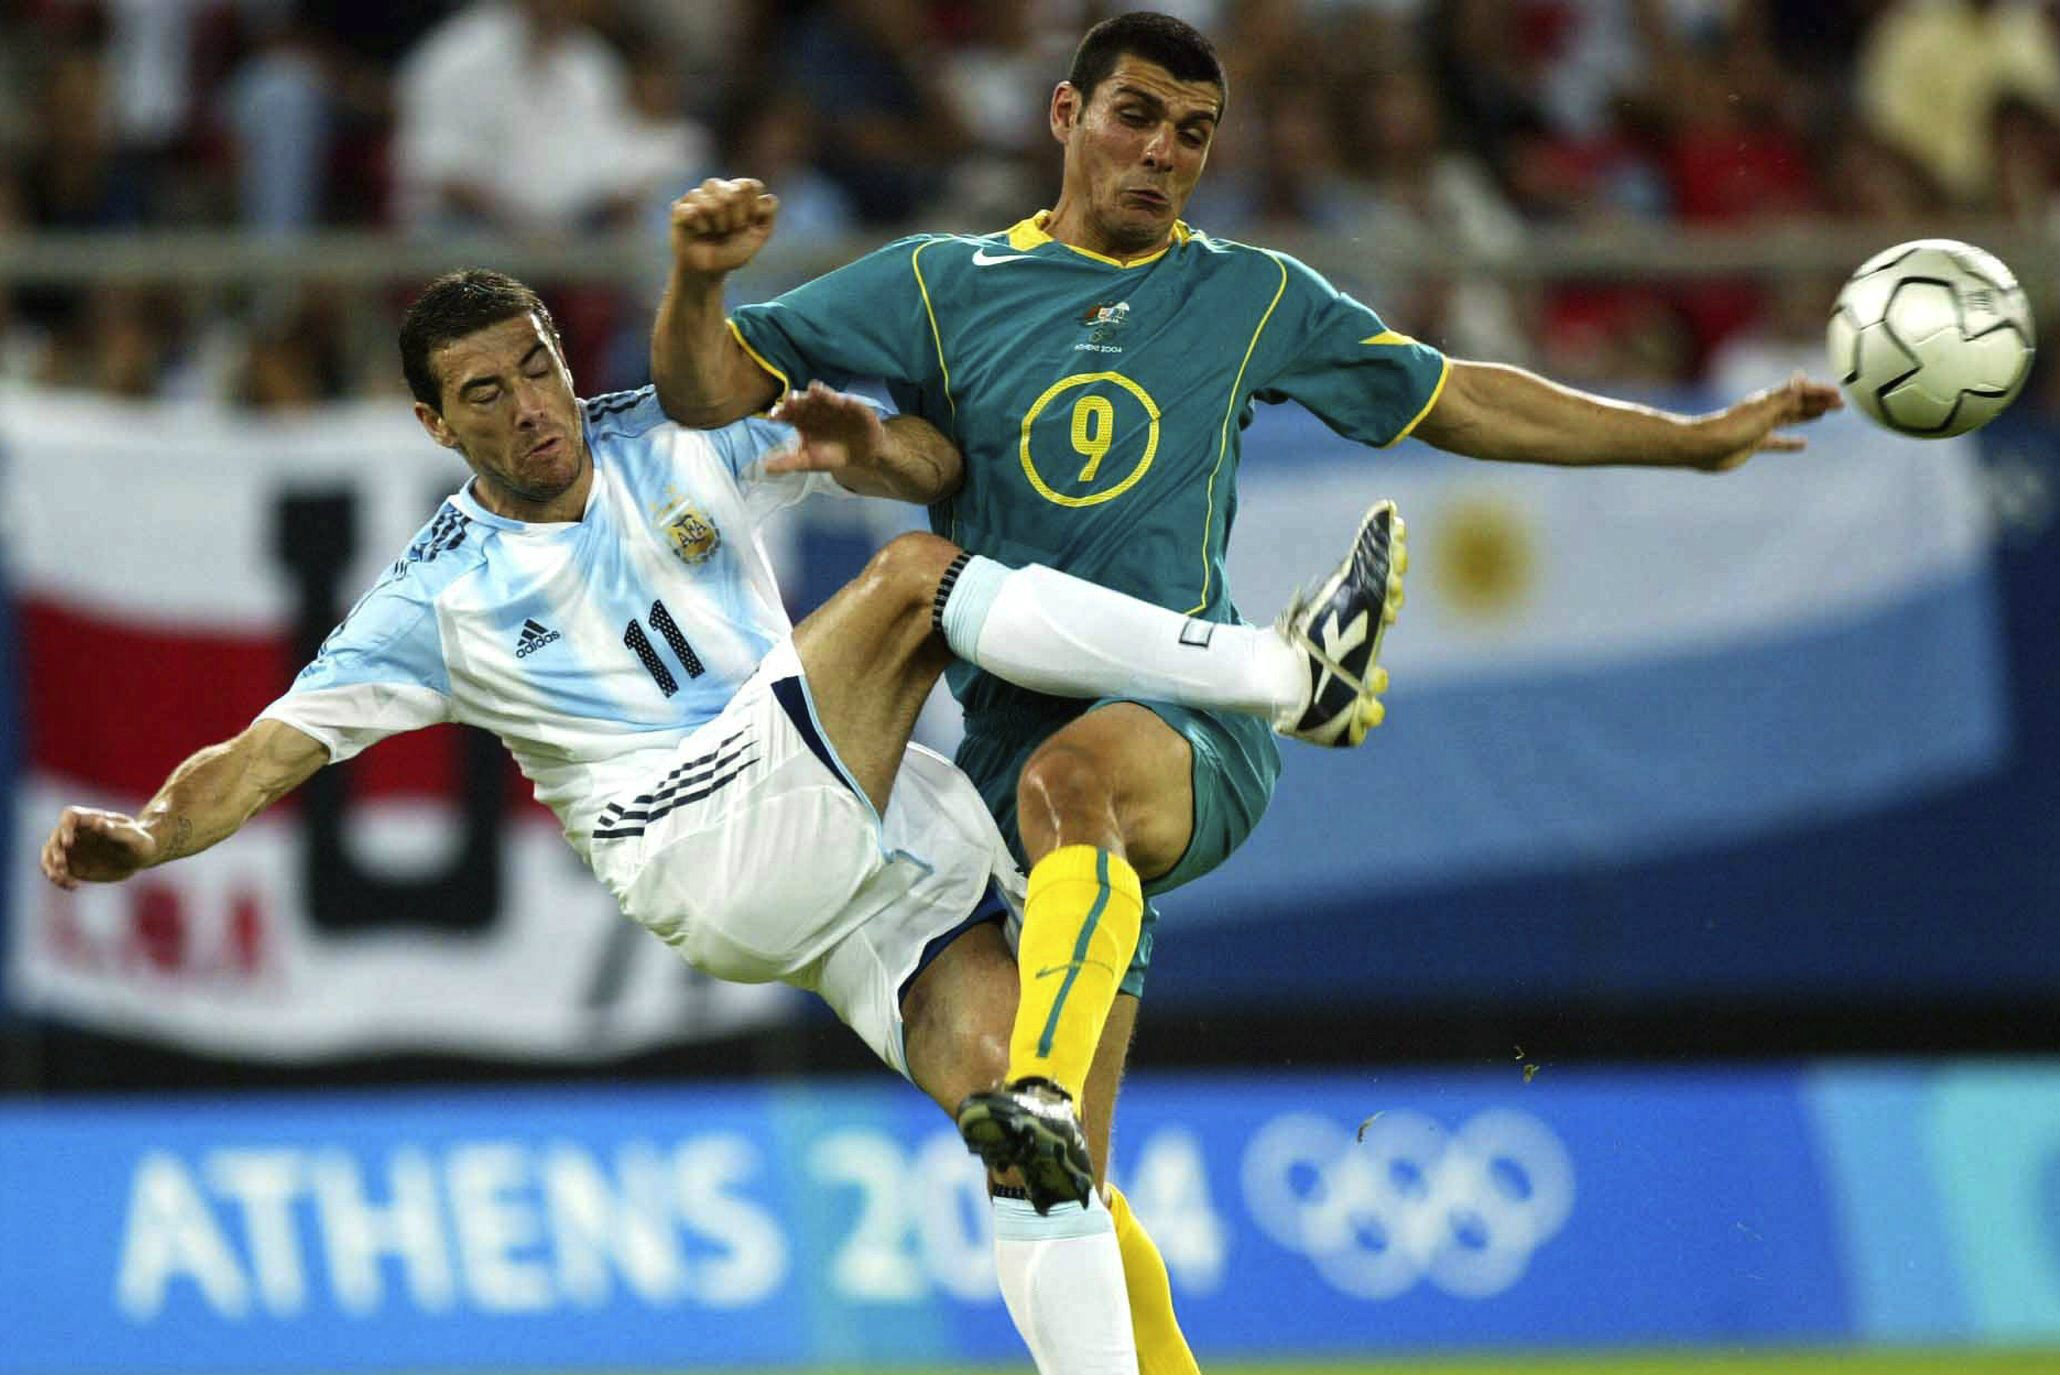 John Aloisi in action against Argentina at the 2004 Olympics